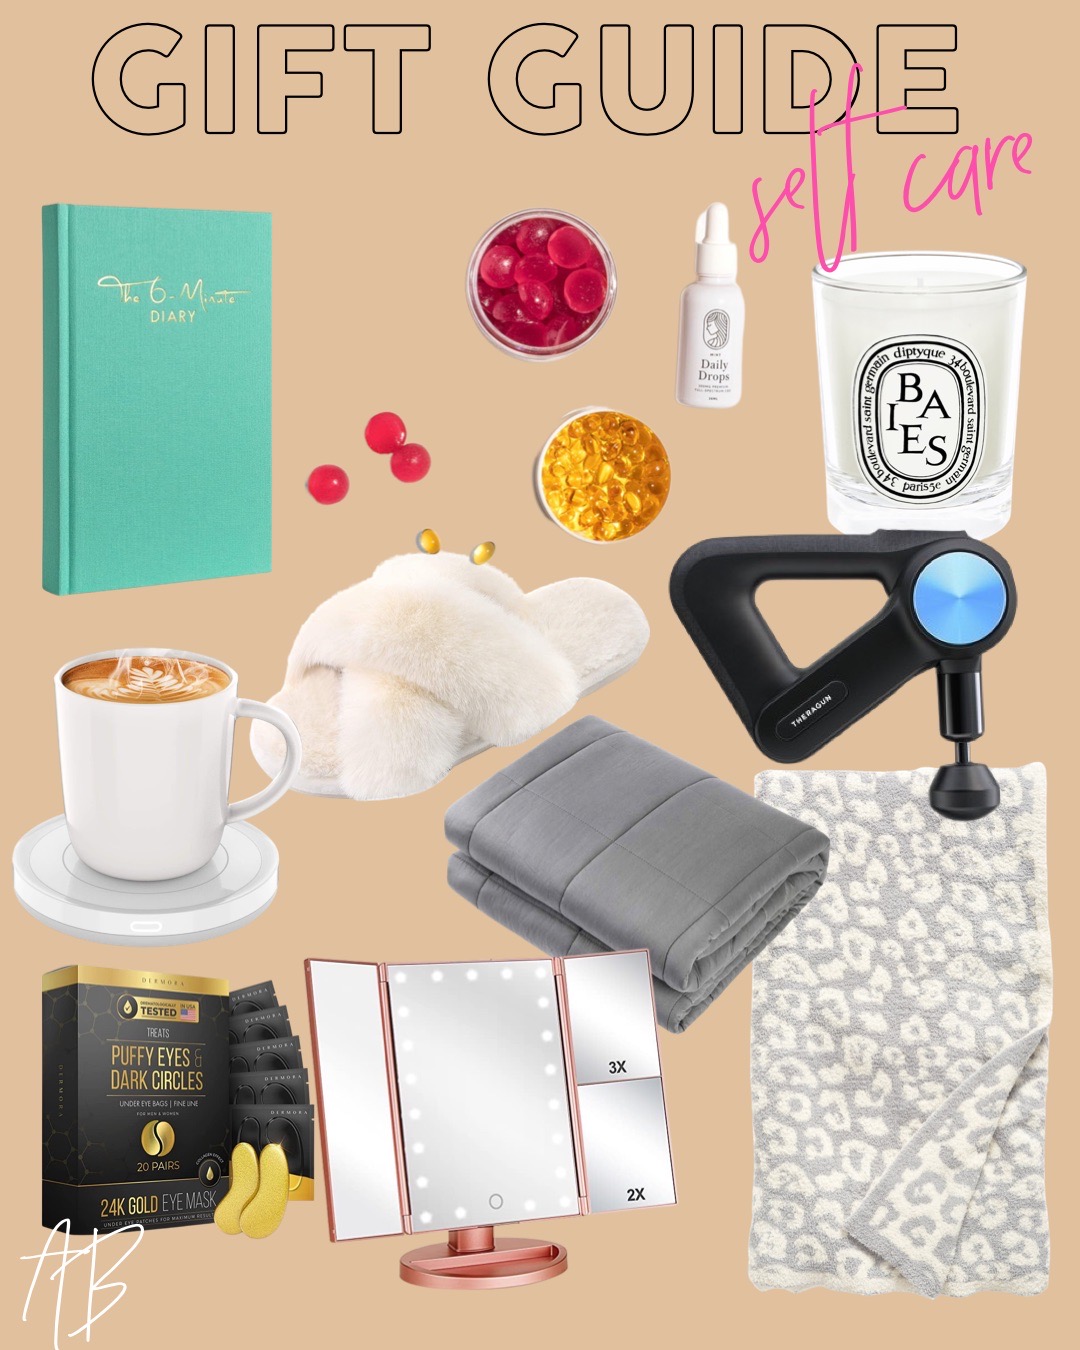 lifestyle and fashion bloggers alexis and samantha belbel share their self care holiday gift ideas for anyone on your list | adoubledose.com